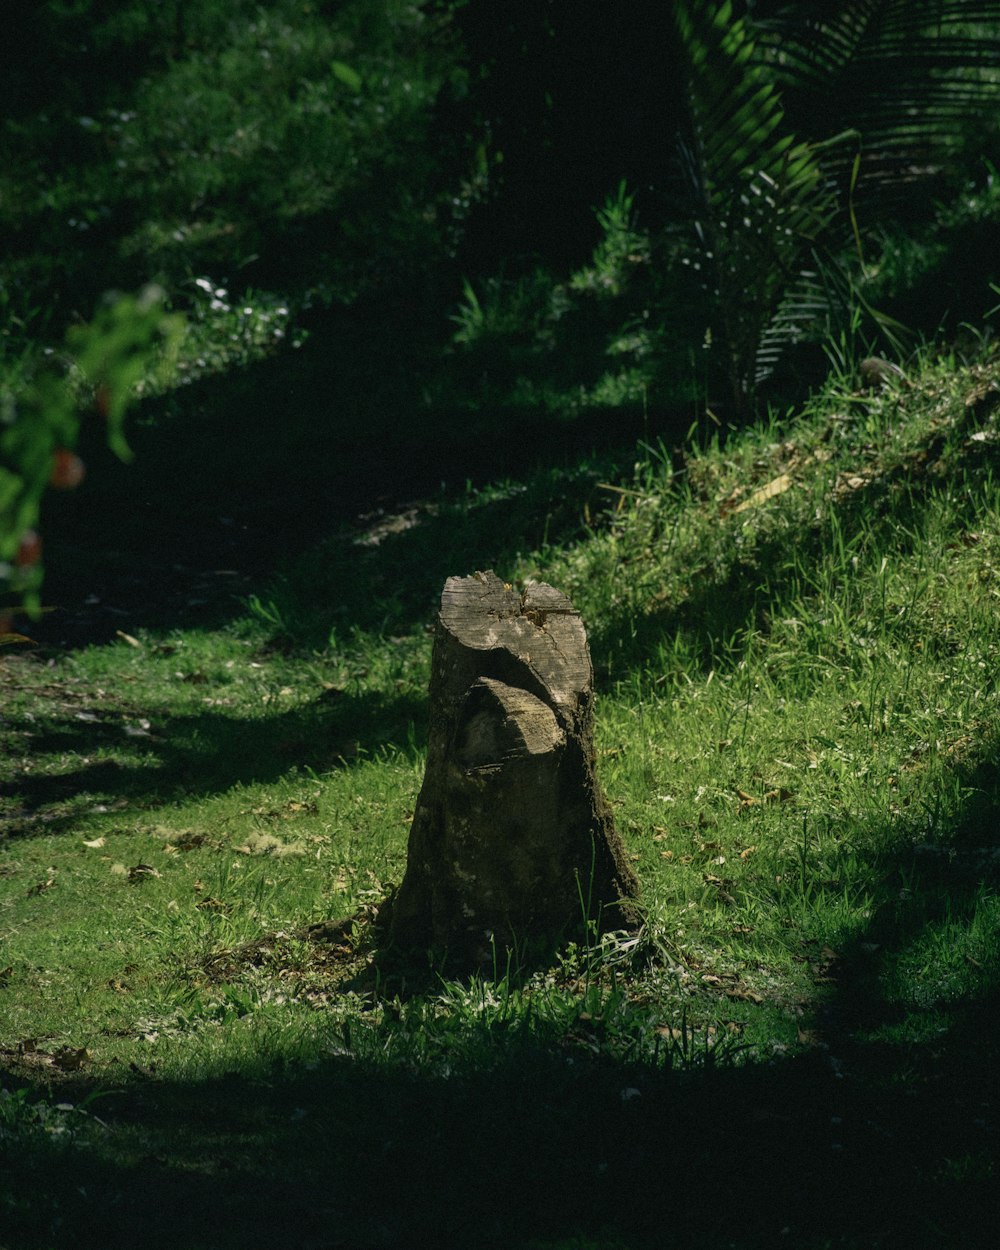 a tree stump sitting in the middle of a lush green field